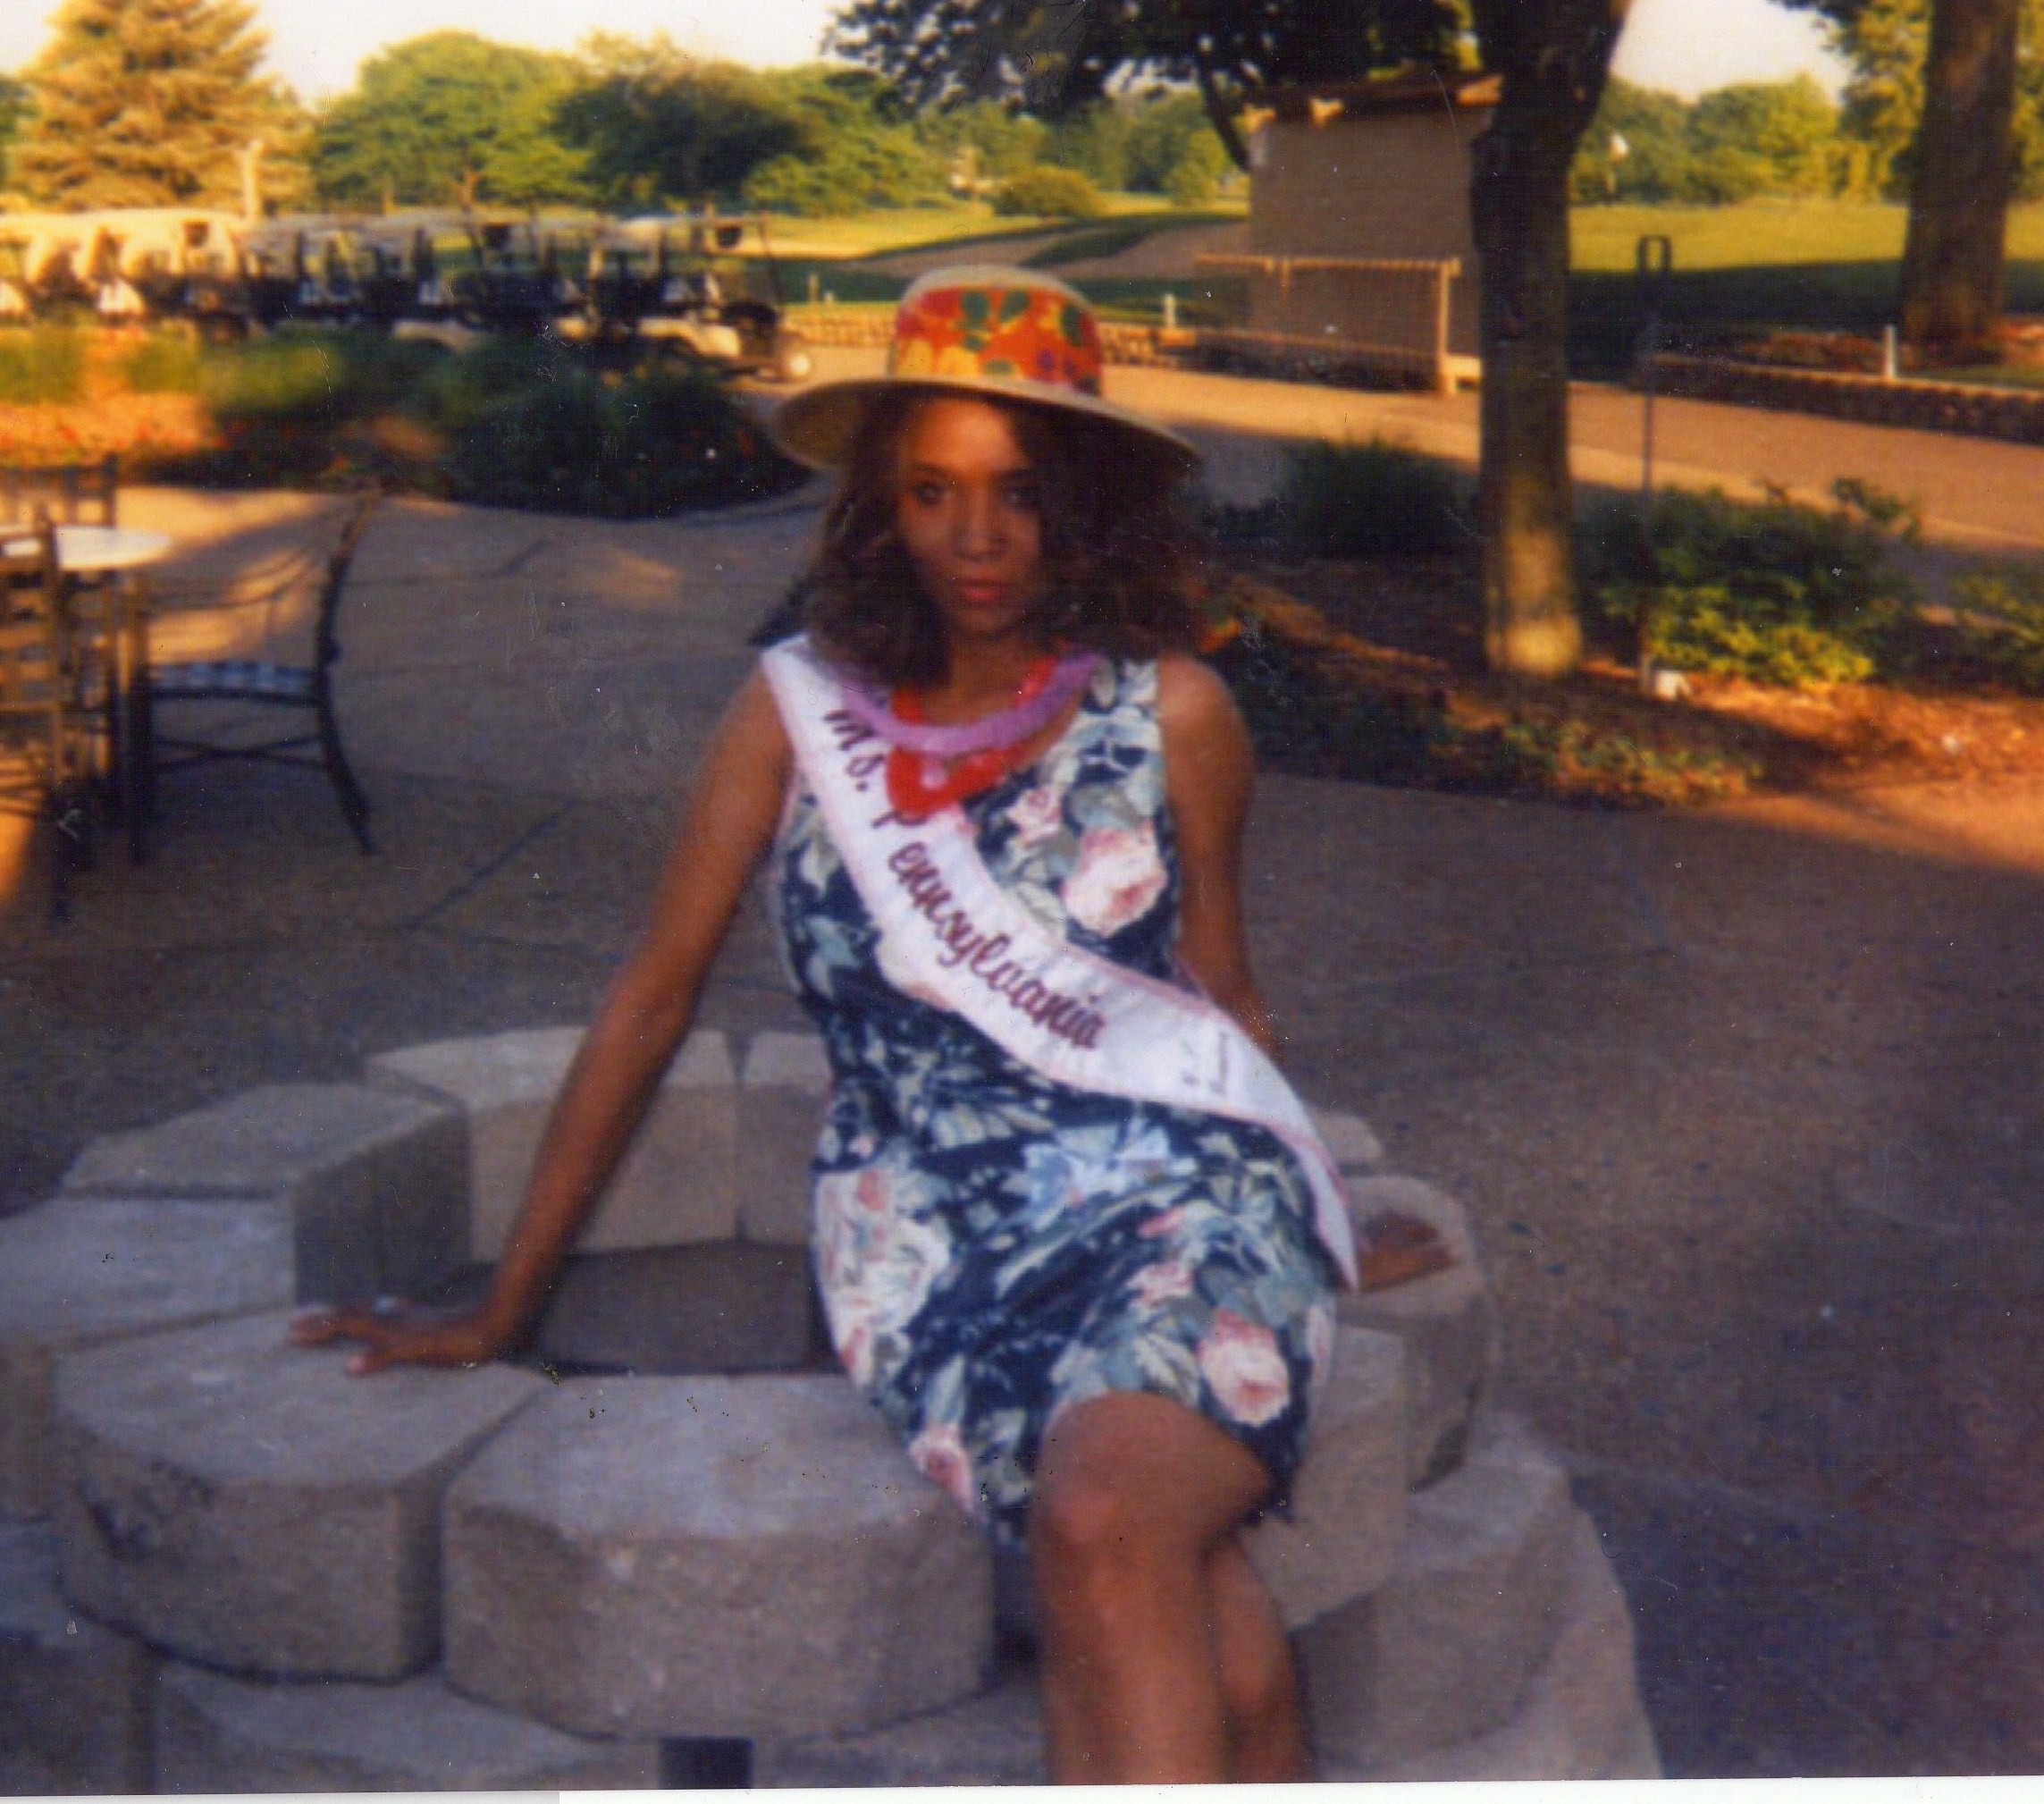 Ms. Pennsylvania 2004 Maria Frisby at the 2004 United States All World Beauties National Pageant in Bloomingdale, Illinois. Ms. Pennsylvania 2004 Maria Frisby was selected as a finalist and 2nd runner-up at the national pageant.